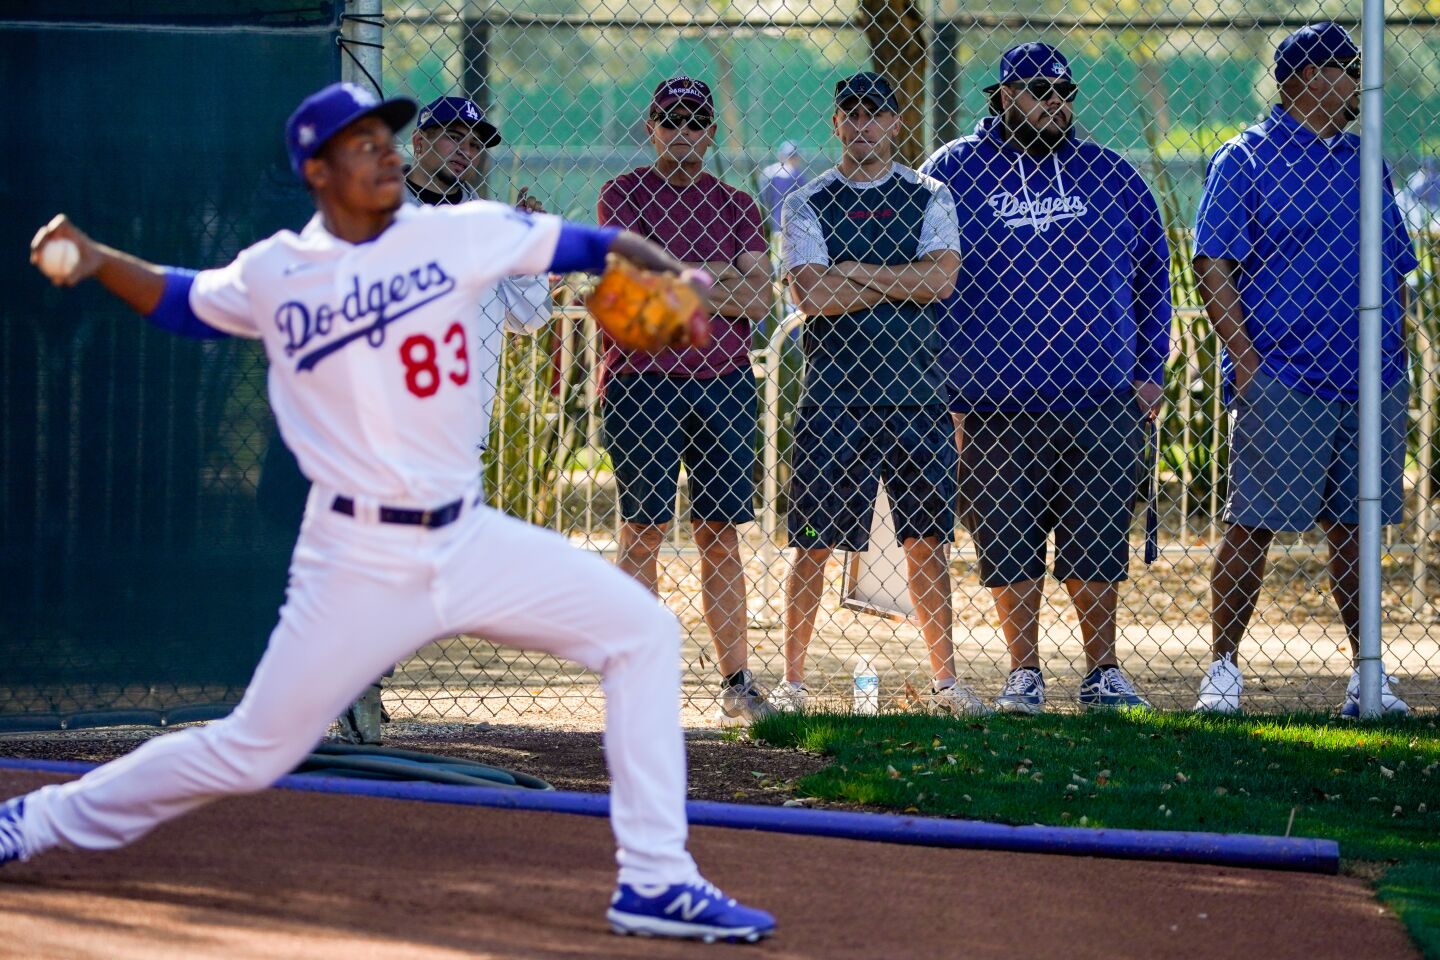 Dodgers fans watch pitcher Josiah Gray throw in the bullpen during spring training at Camelback Ranch.